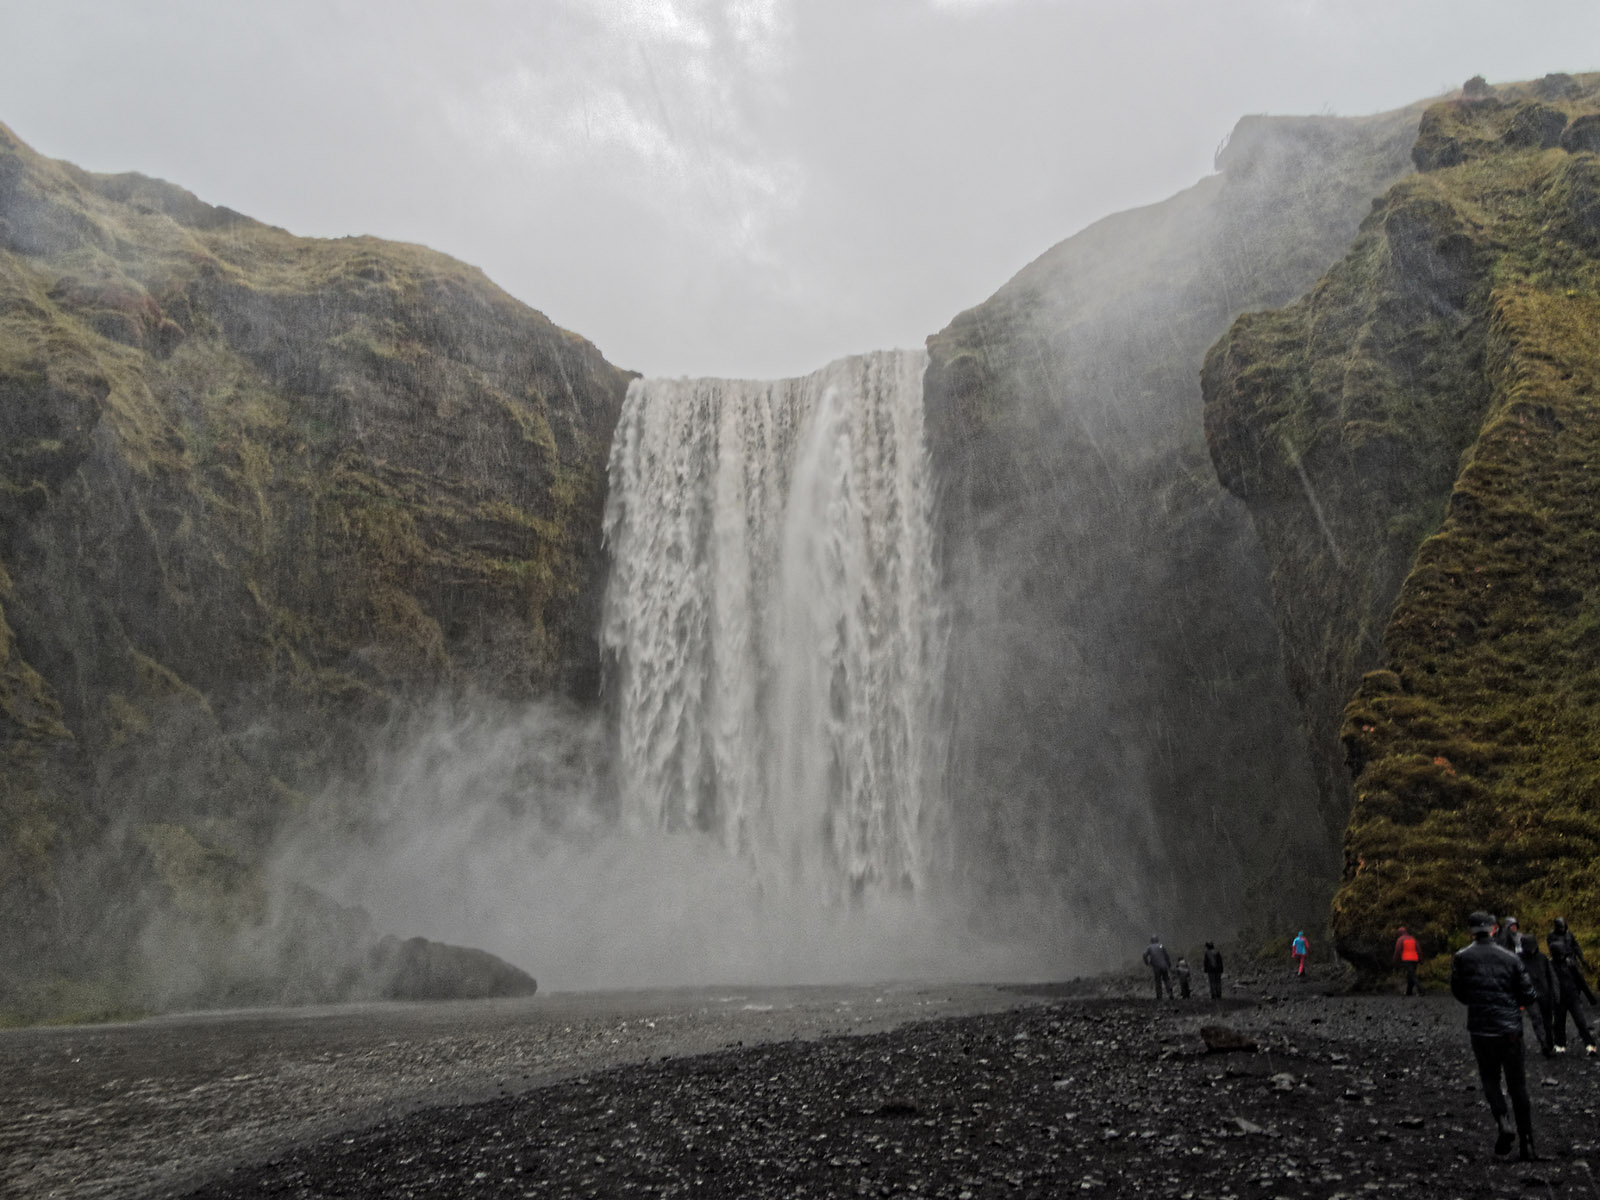 Skógarfoss in the rain.  Another beautiful waterfall off sea cliffs that were formed 13,000 years ago when sea levels at this site were higher.  The cliff face is primarily hyaloclastite